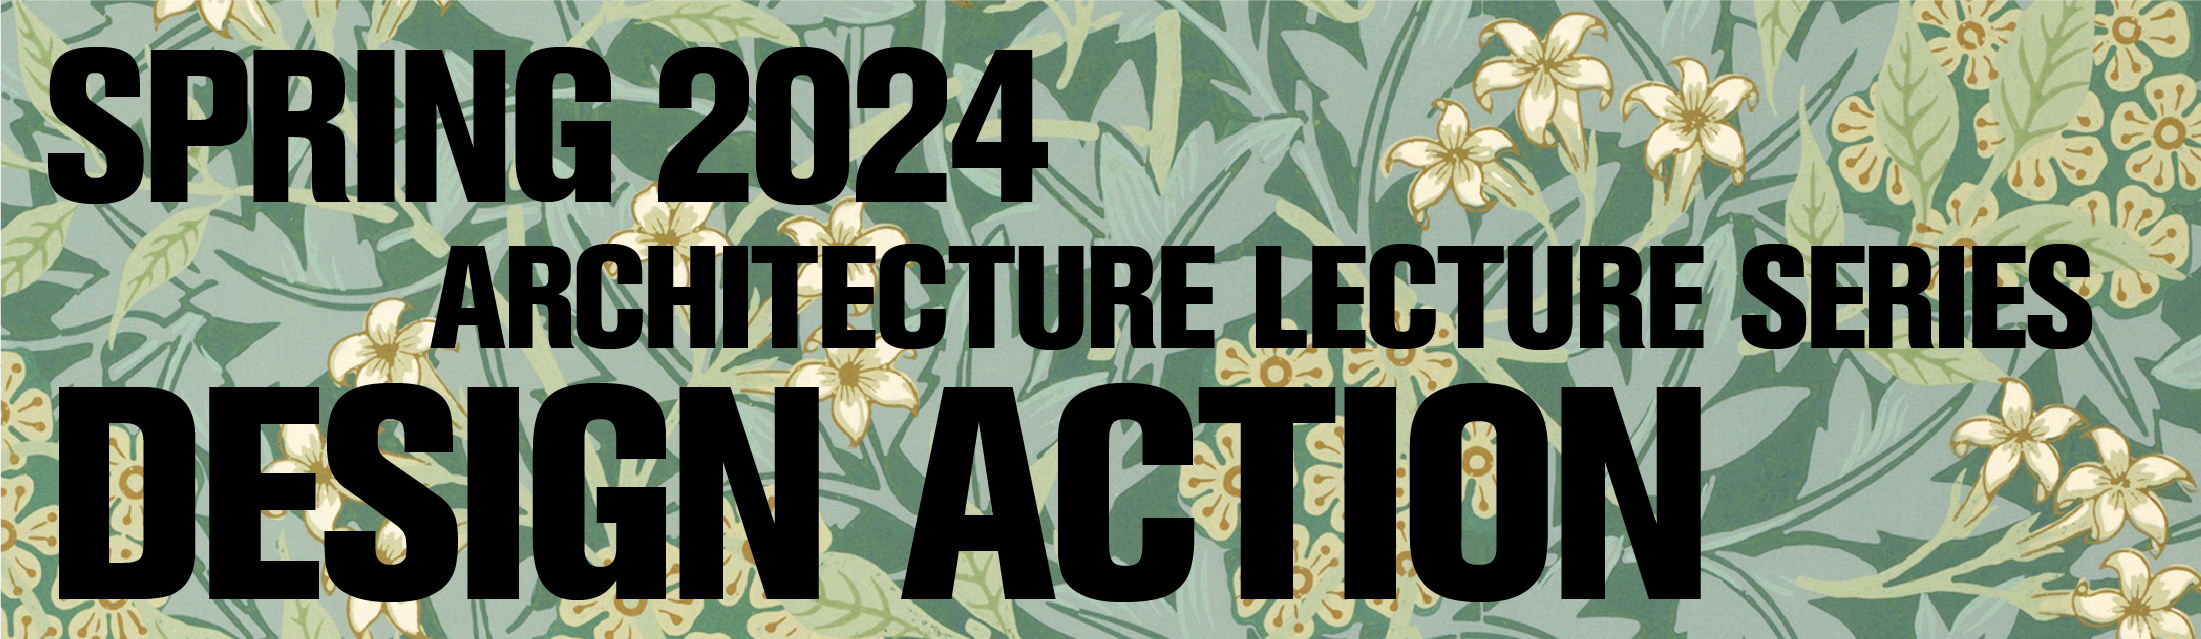 CCA_Spring 2024 Lecture Series Image for Portal_Short.png